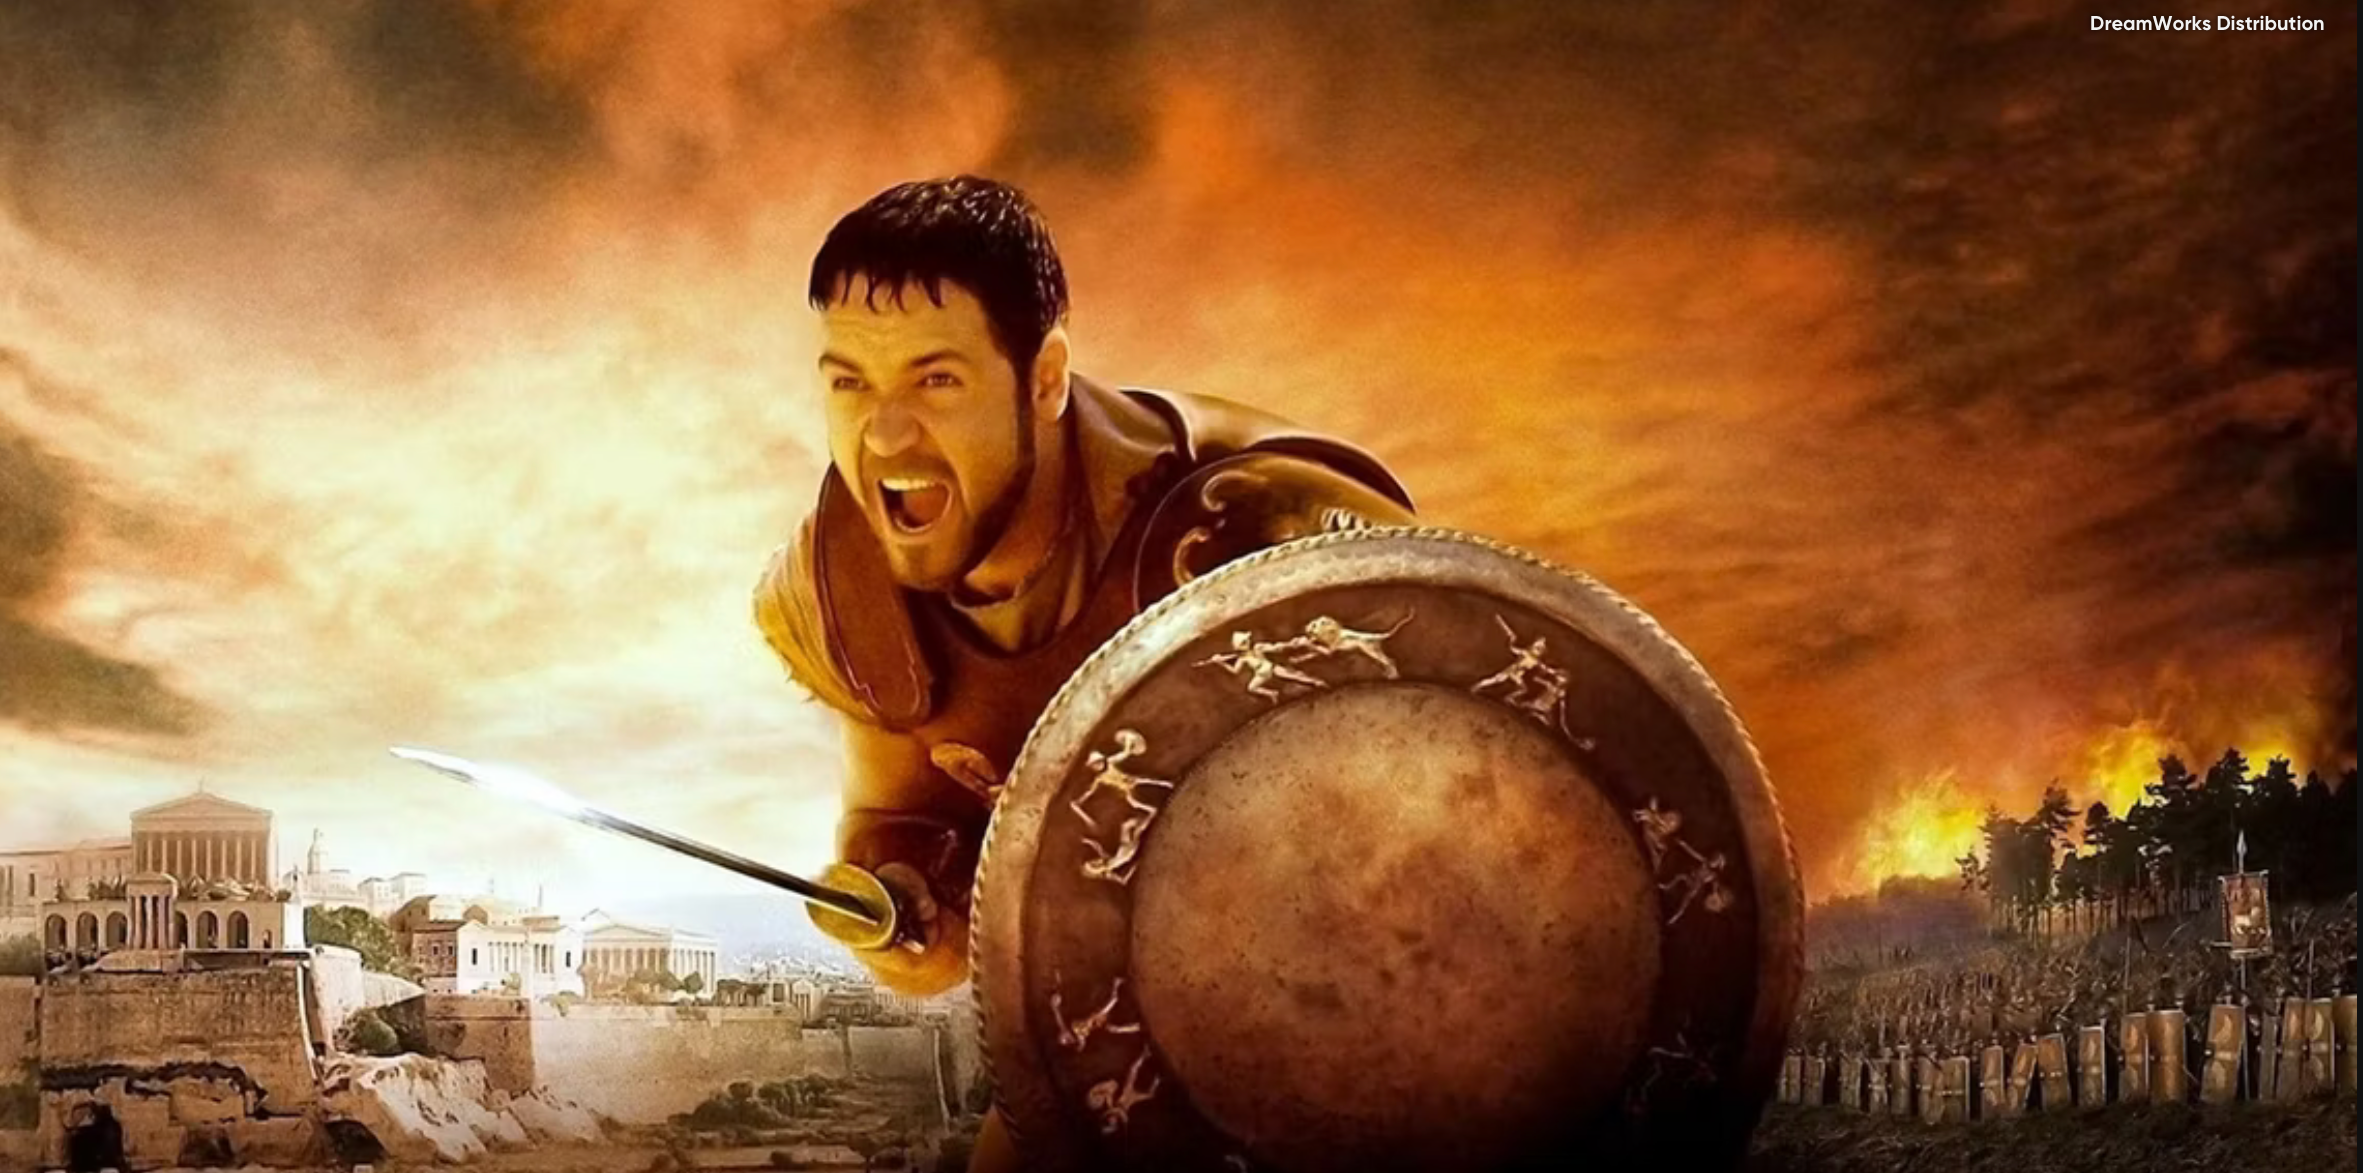 Gladiator 2 Early Footage Reportedly Leaves Studio Execs 'Blown Away' 